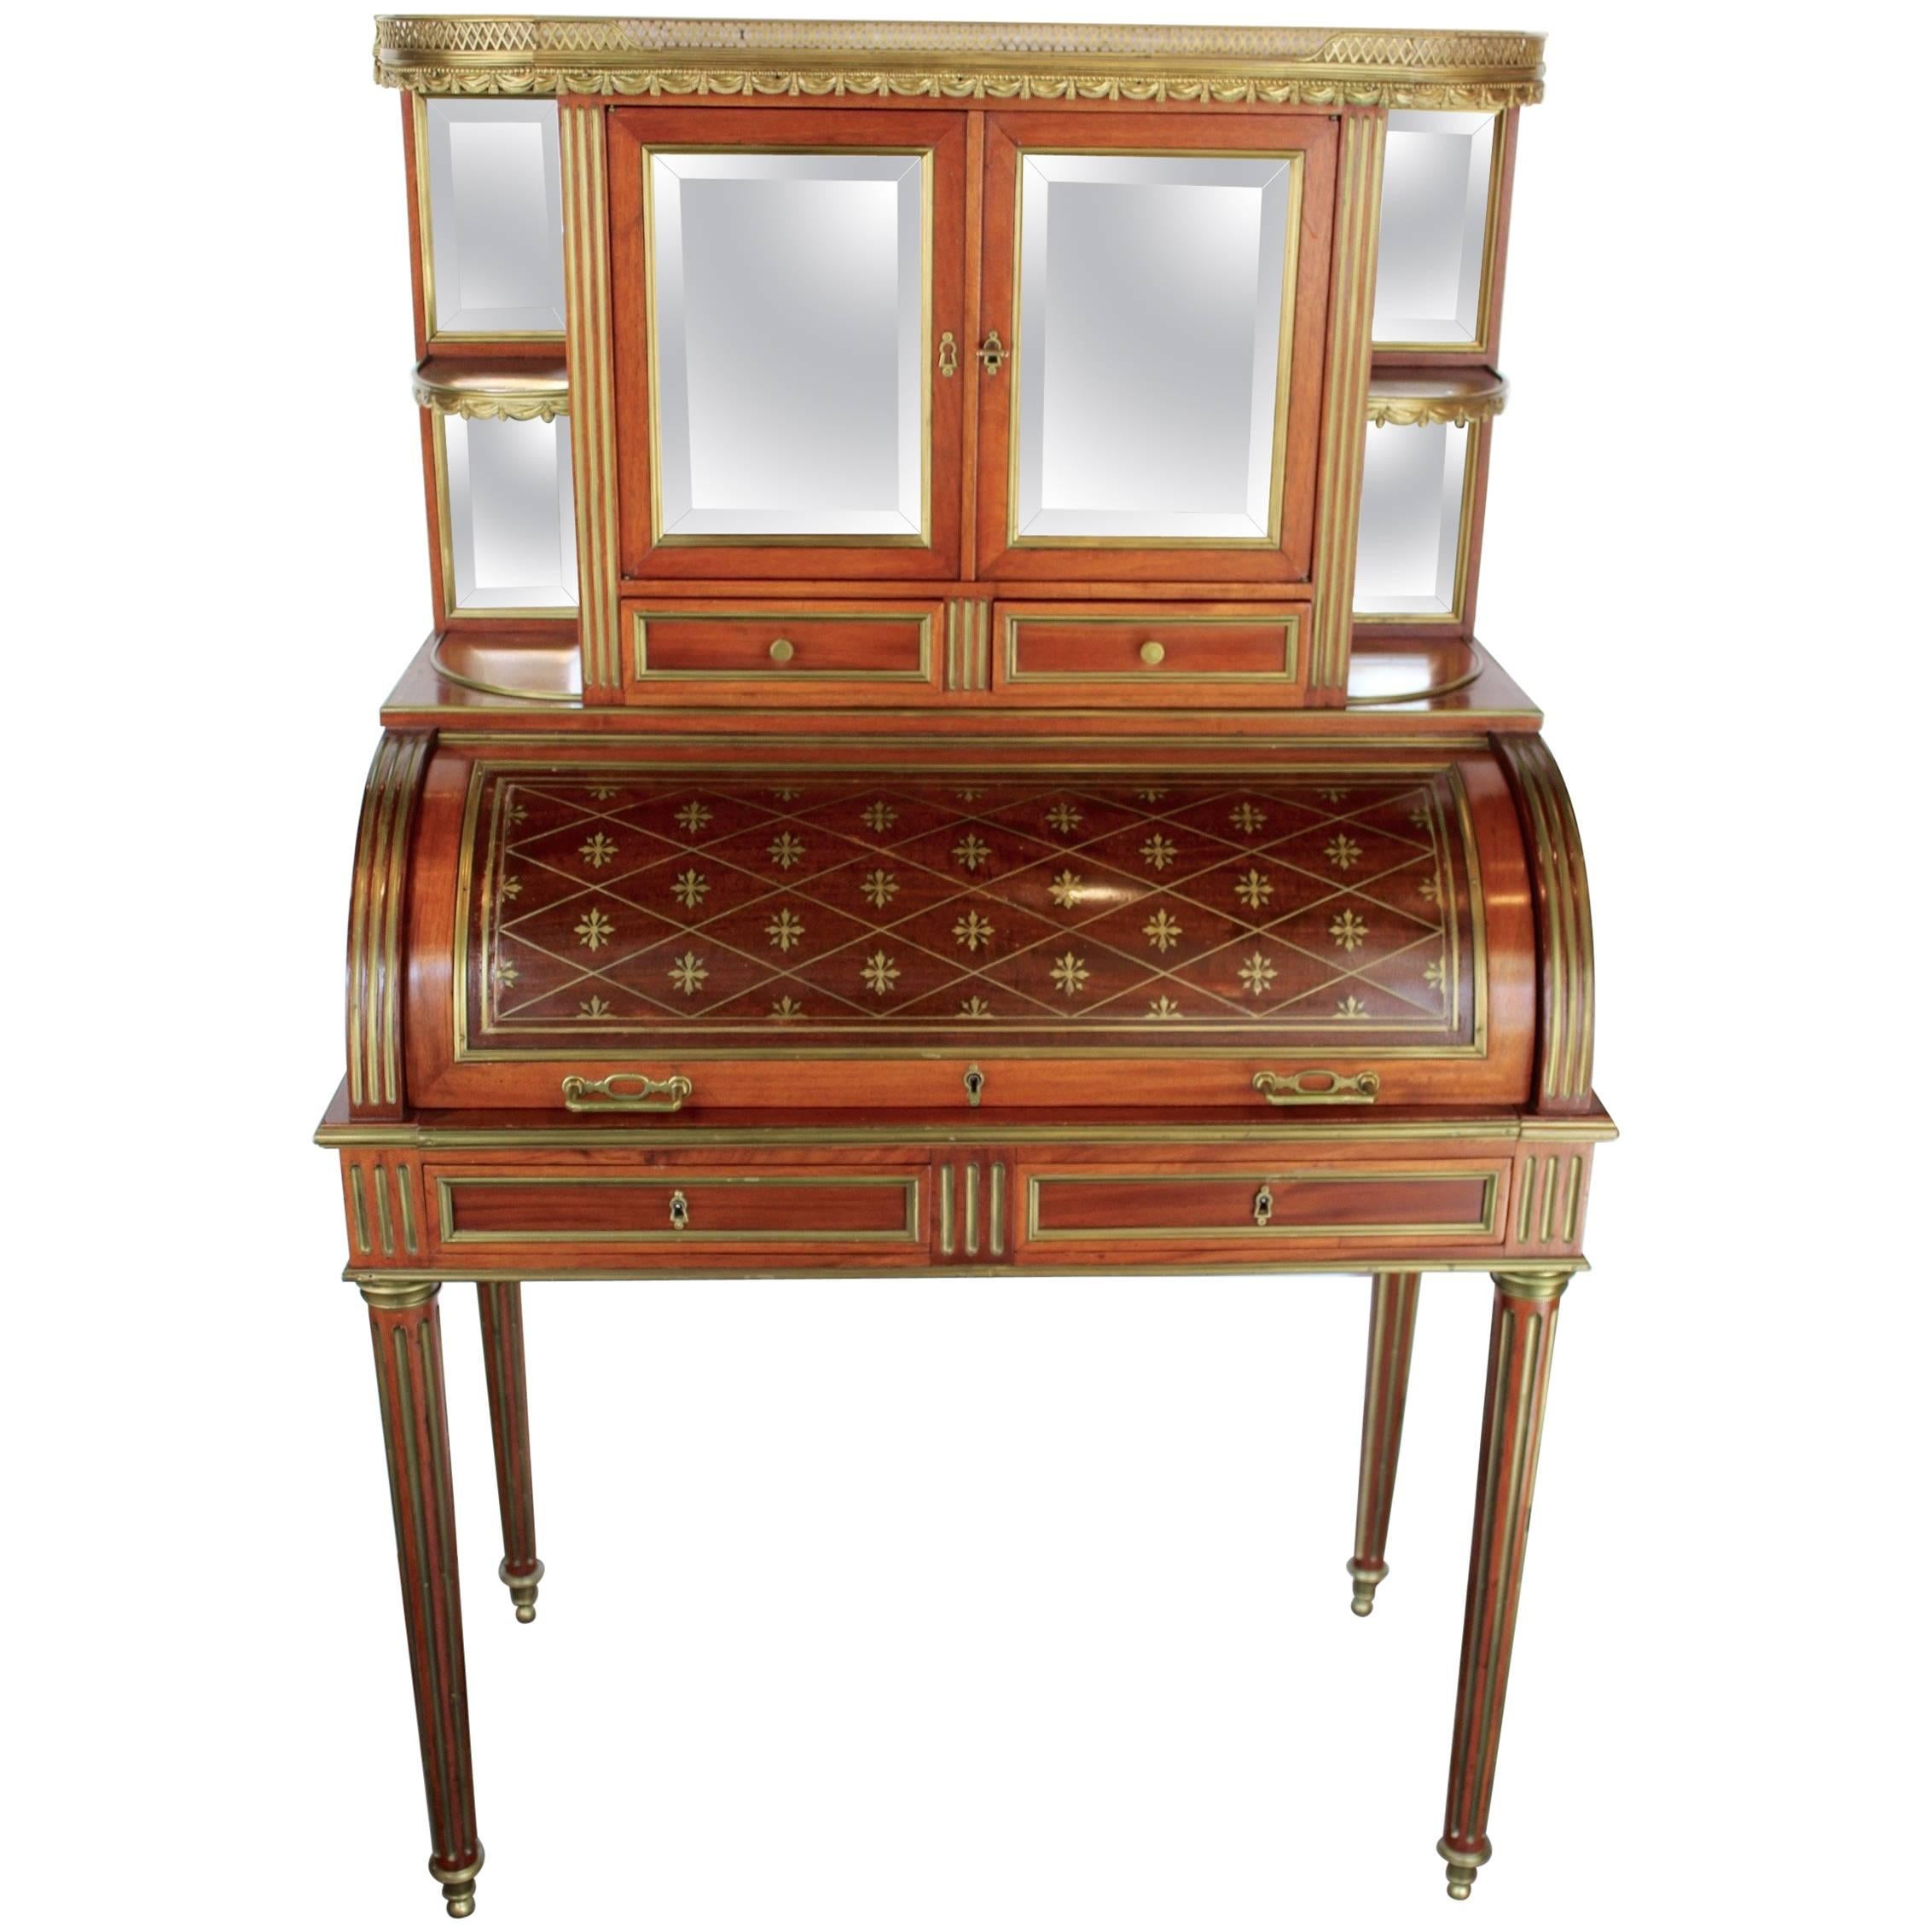 French 19th Century Mahogany Veneer and Brass inlaid "Bureau a Cylindre" For Sale